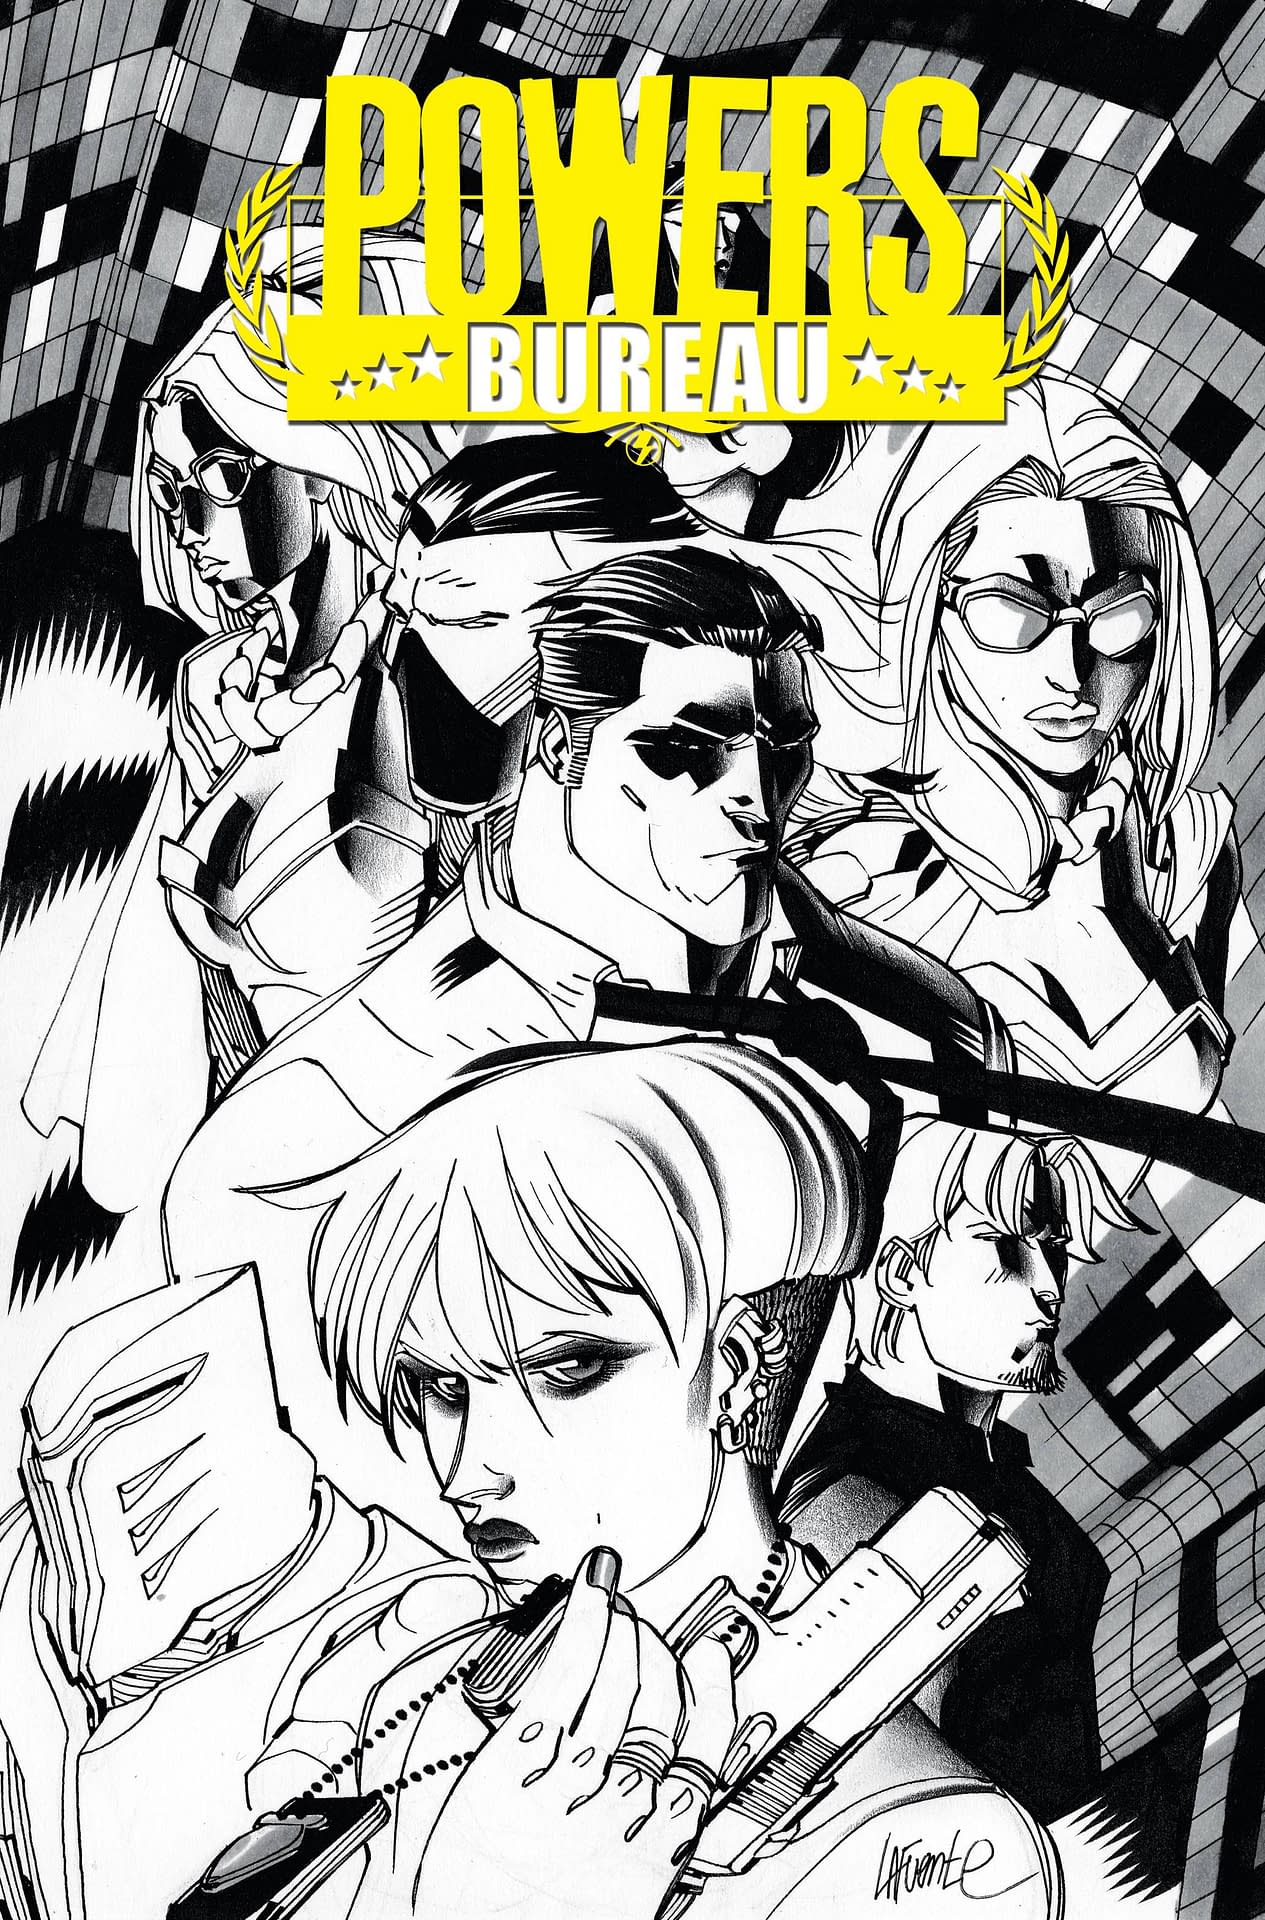 Mack And LaFuente, The Two Davids, Give Powers Bureau #1 A Couple More Covers